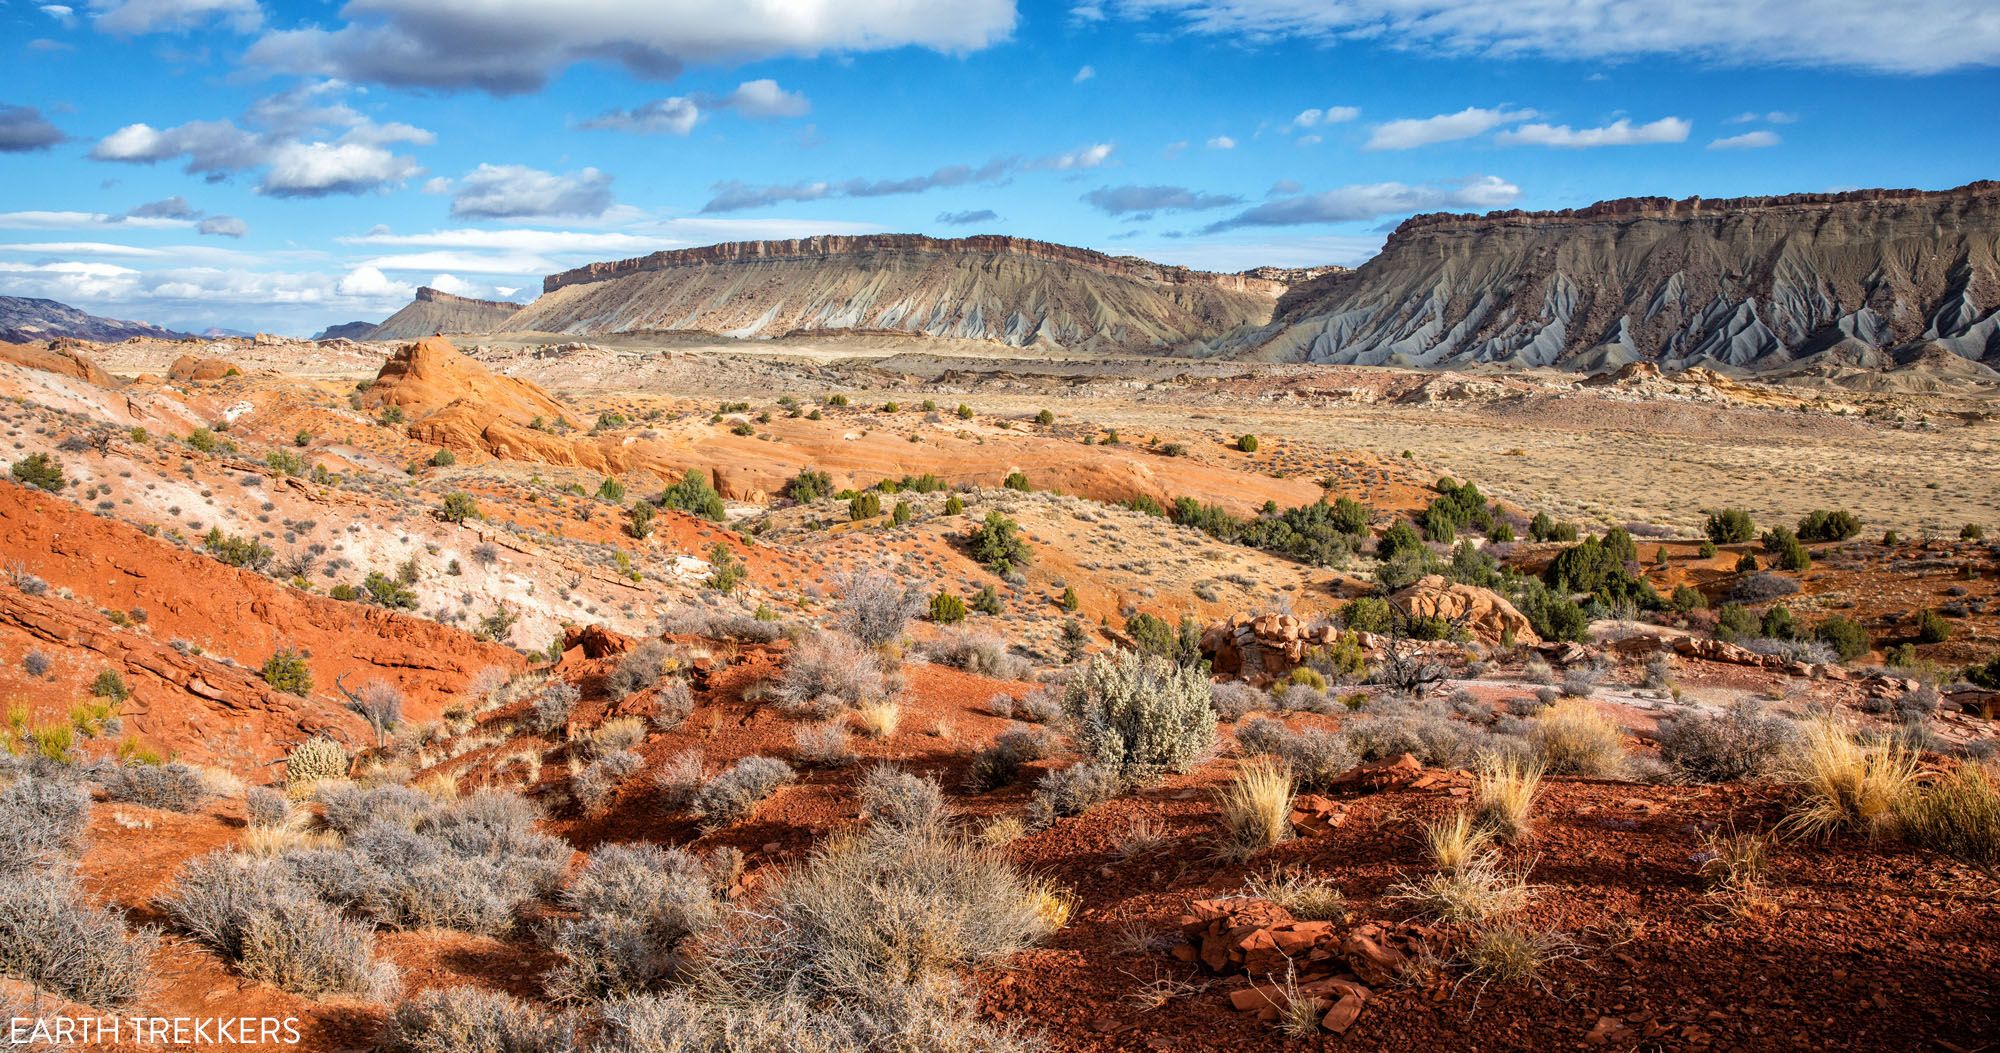 Featured image for “How to Loop the Fold in Capitol Reef National Park”